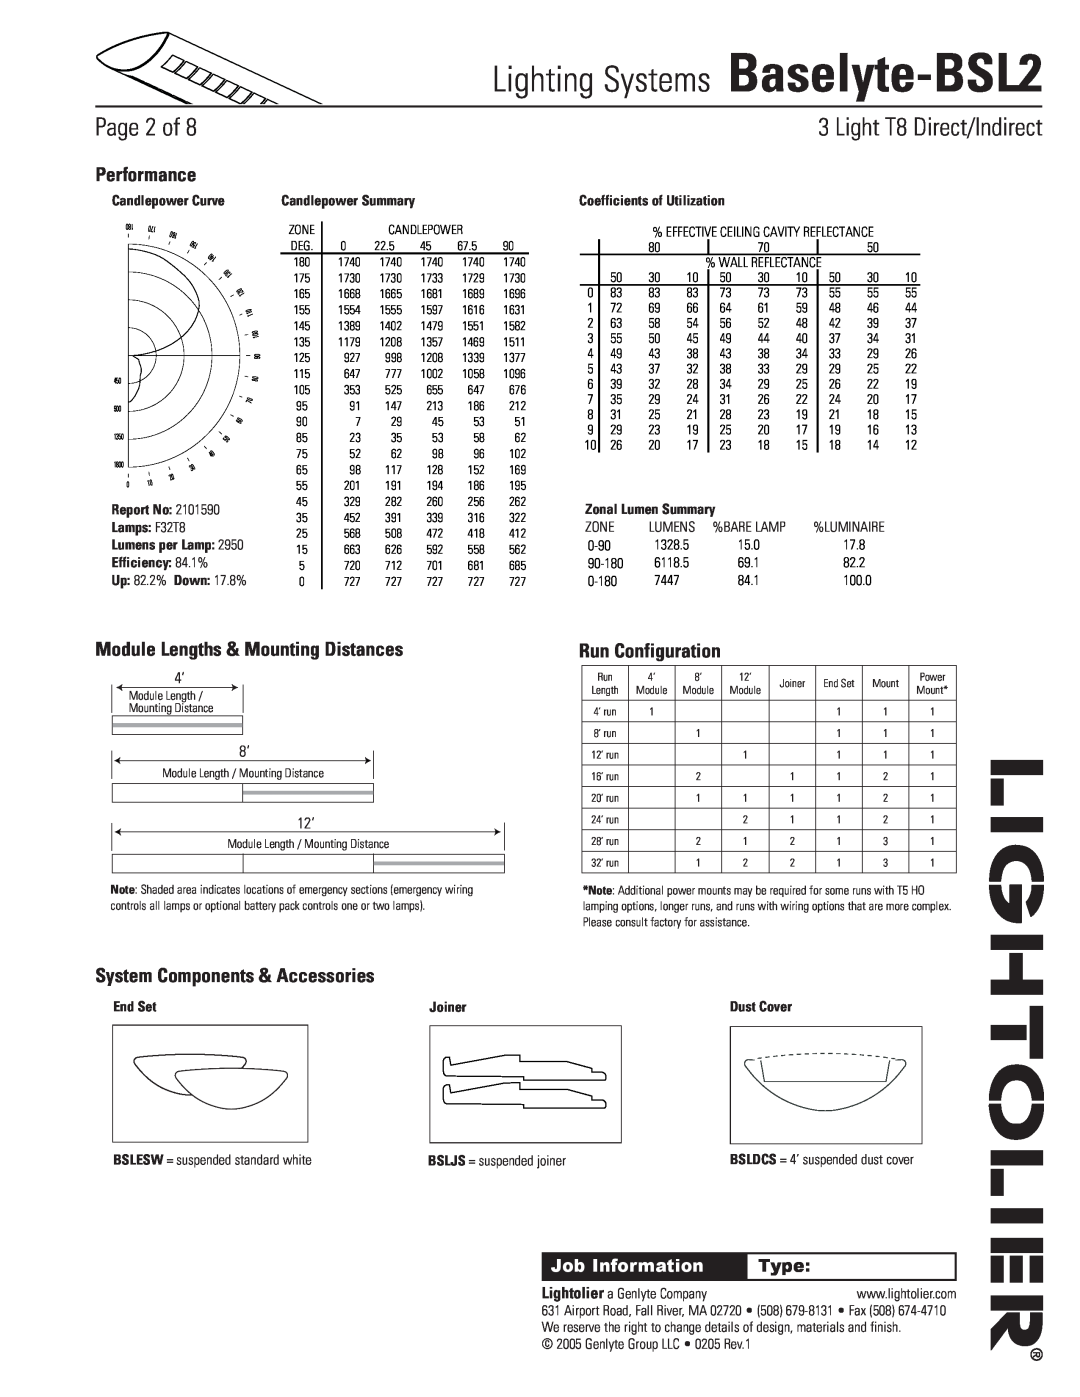 Lightolier Baselyte-BSL2 Light T8 Direct/Indirect, Performance, Module Lengths & Mounting Distances, Run Configuration 